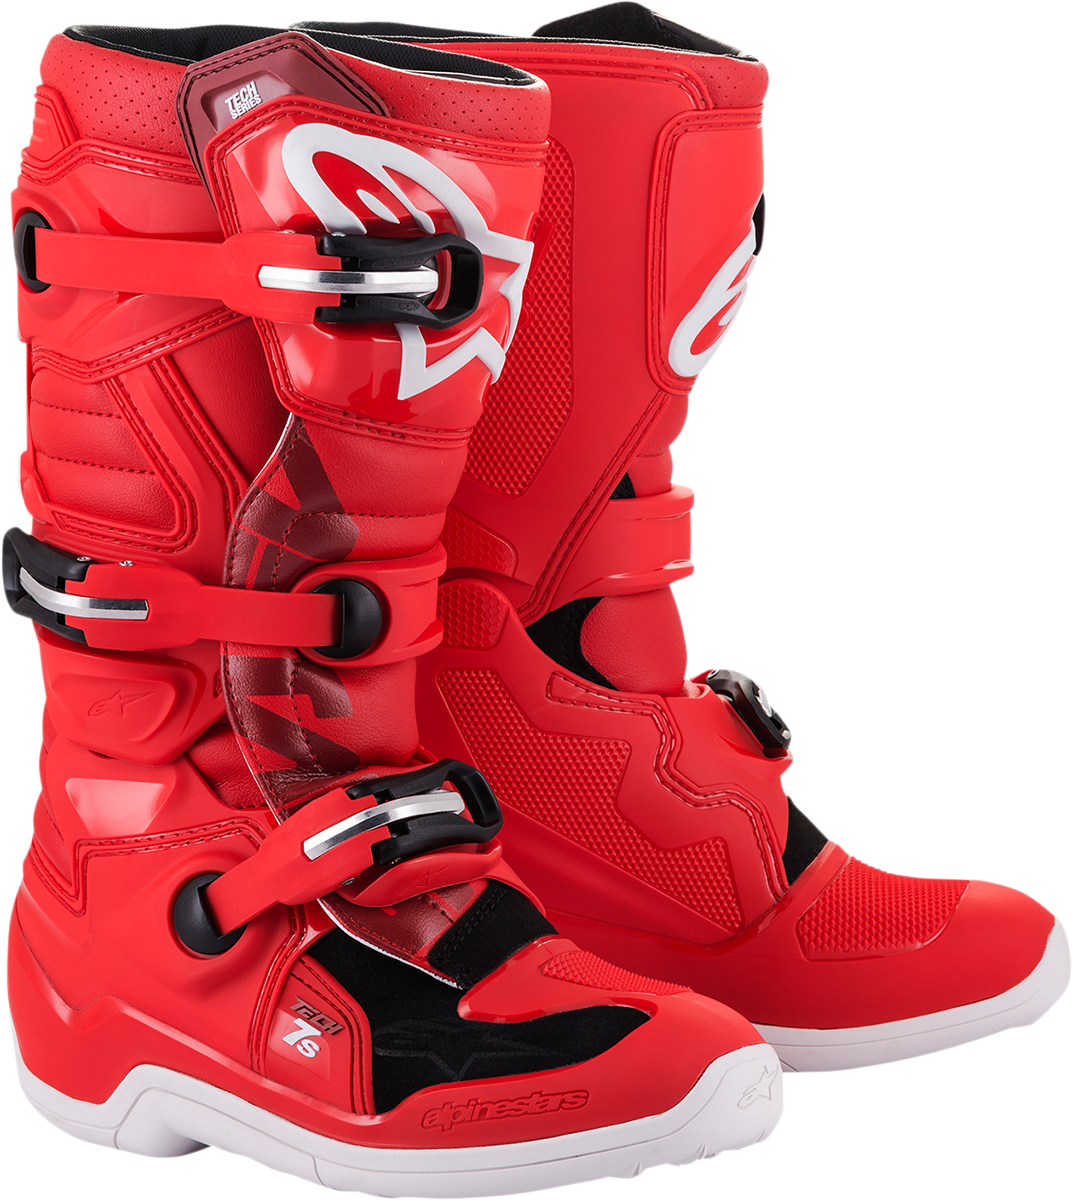 ALPINESTARS Youth Tech 7S Boots - Red - US 2 2015017-30-2